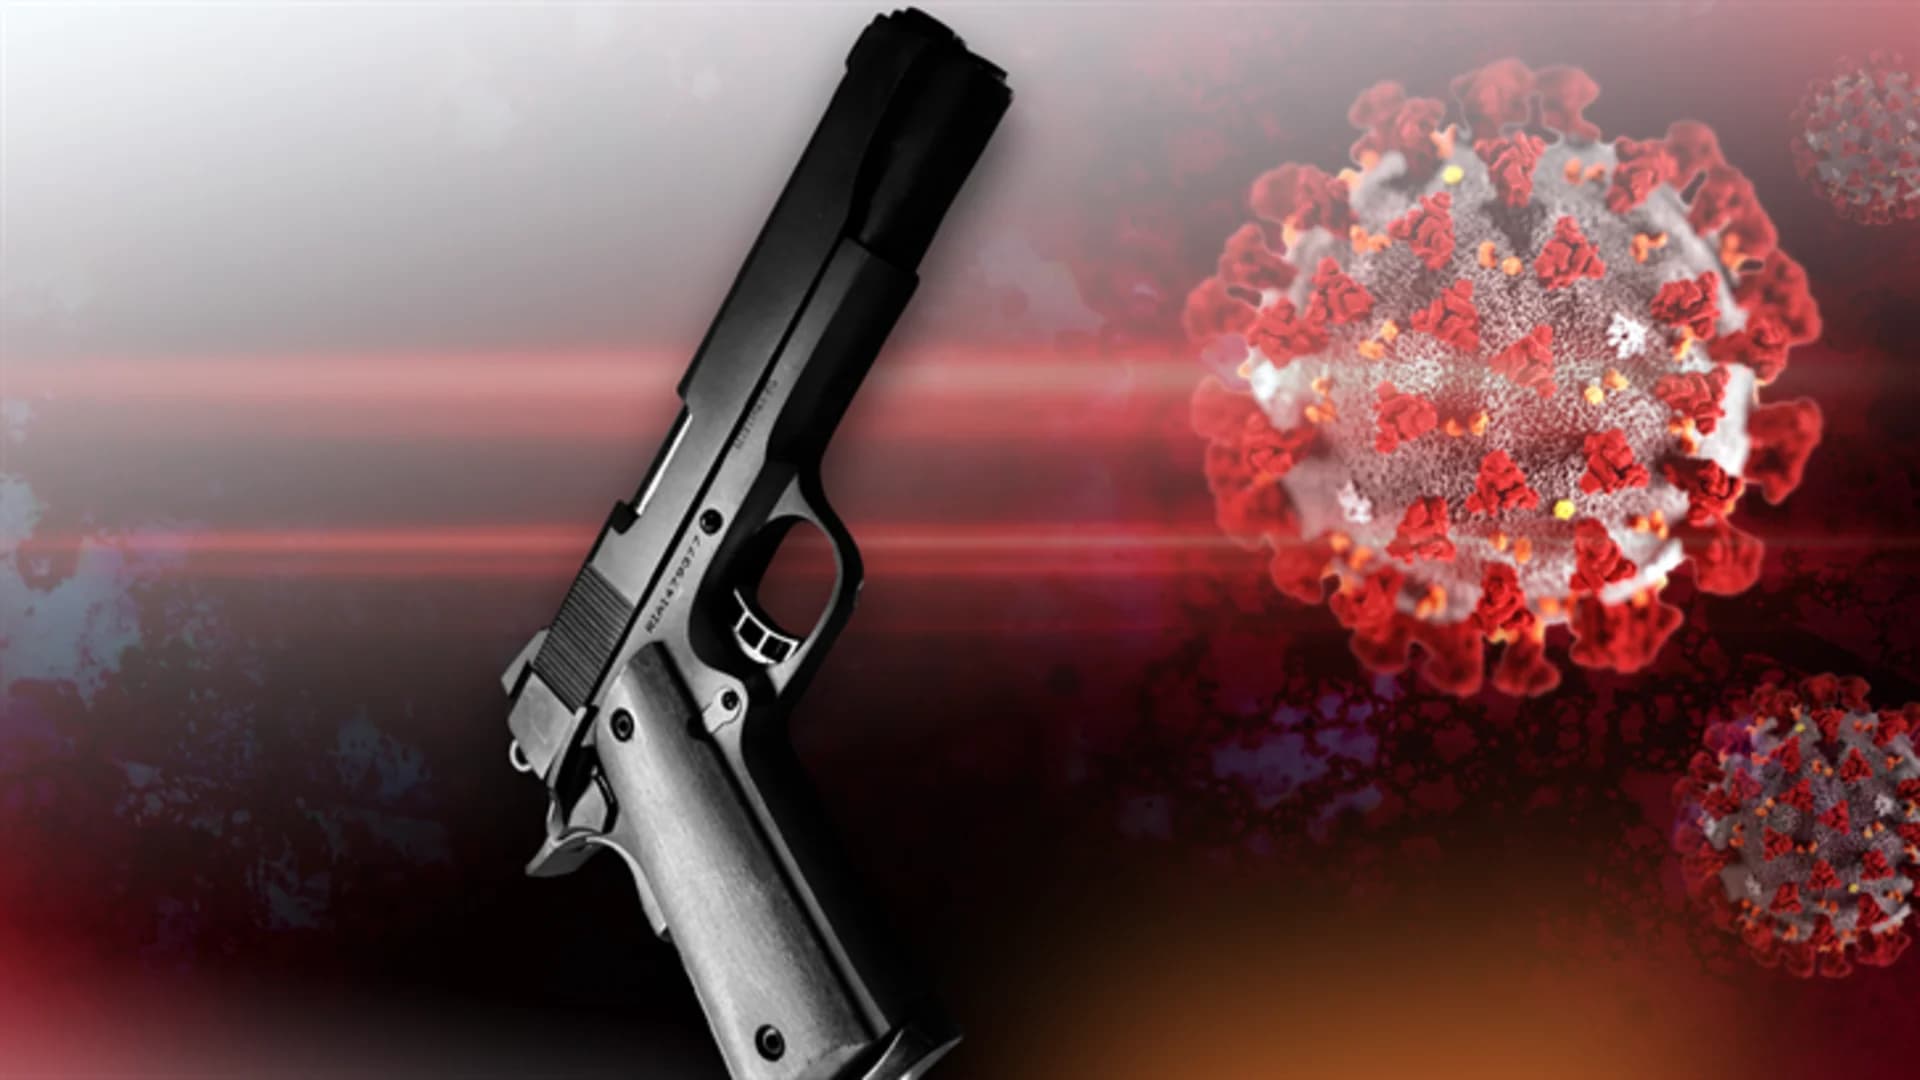 Gun, ammunition sales continue to rise along with number of positive coronavirus tests in NJ